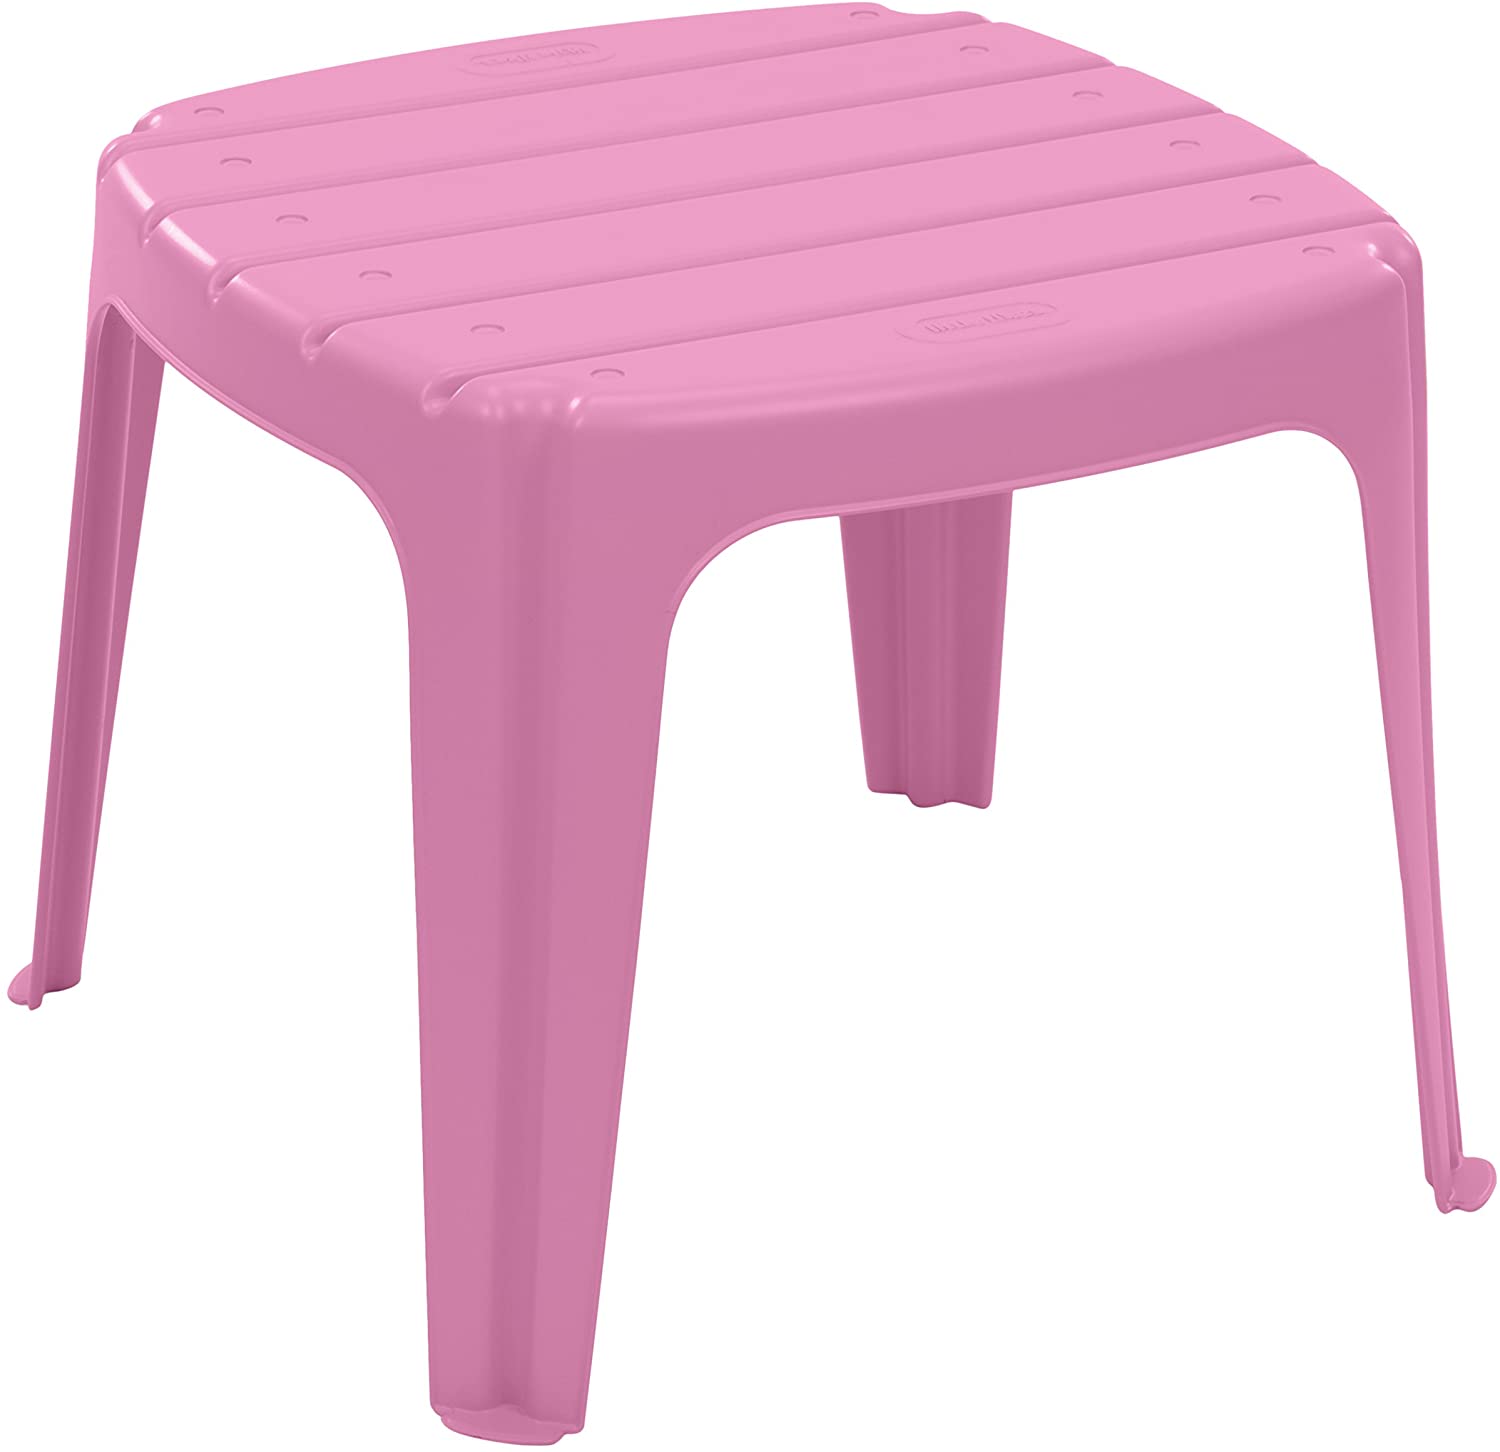 Garden Table Pink or Red